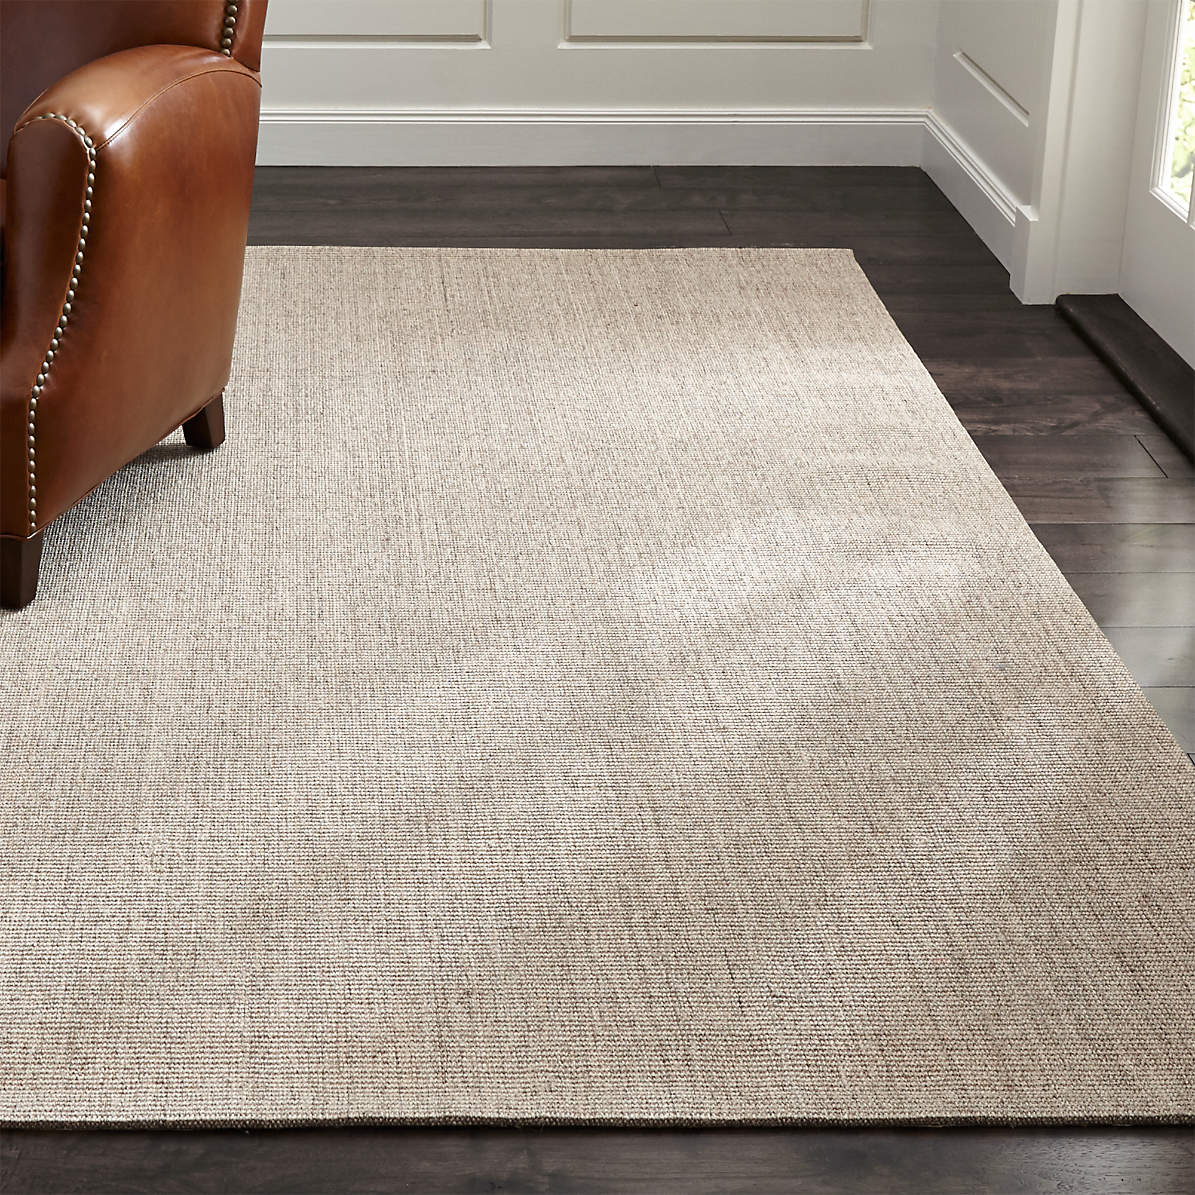 Linon Aspire Collection Wool Pane Gray Natural Fiber Rugs Off/White 5'X 8' 